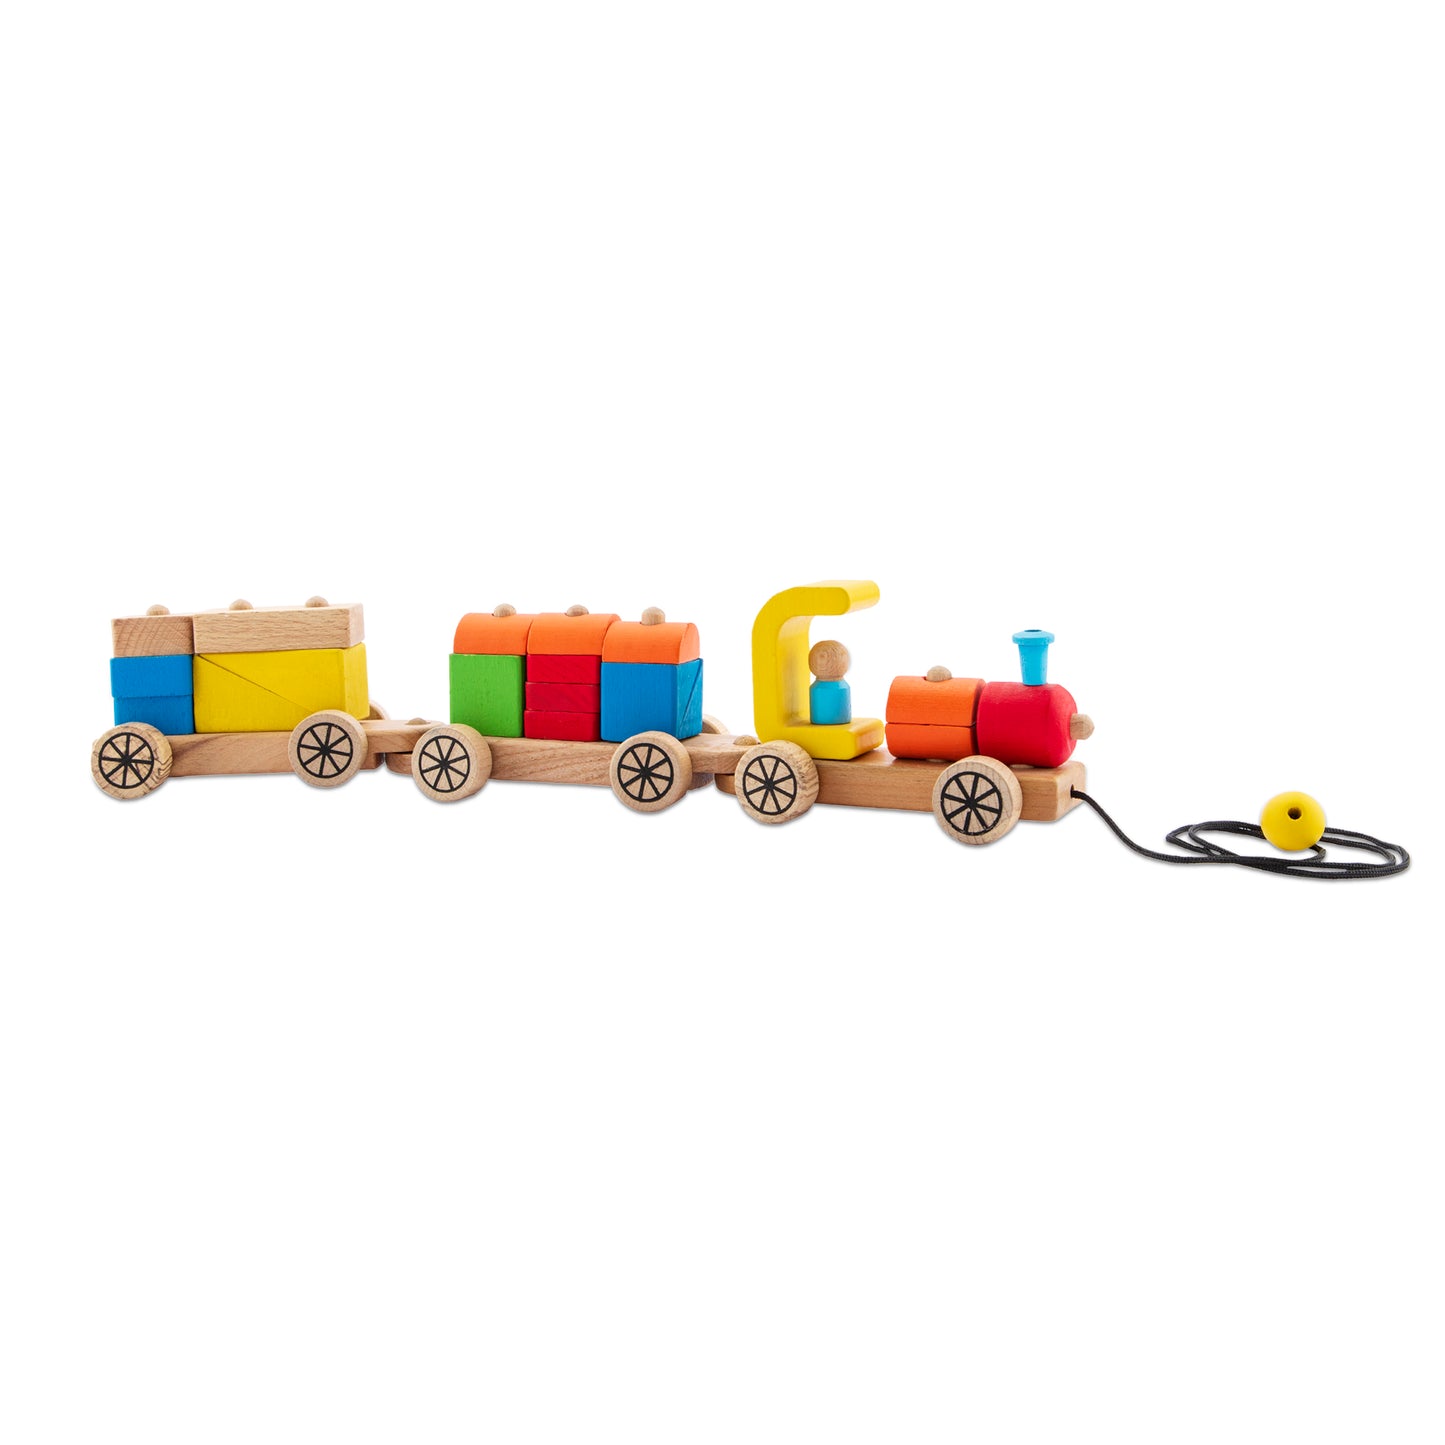 Wooden Building Block Train Pull Along Toy